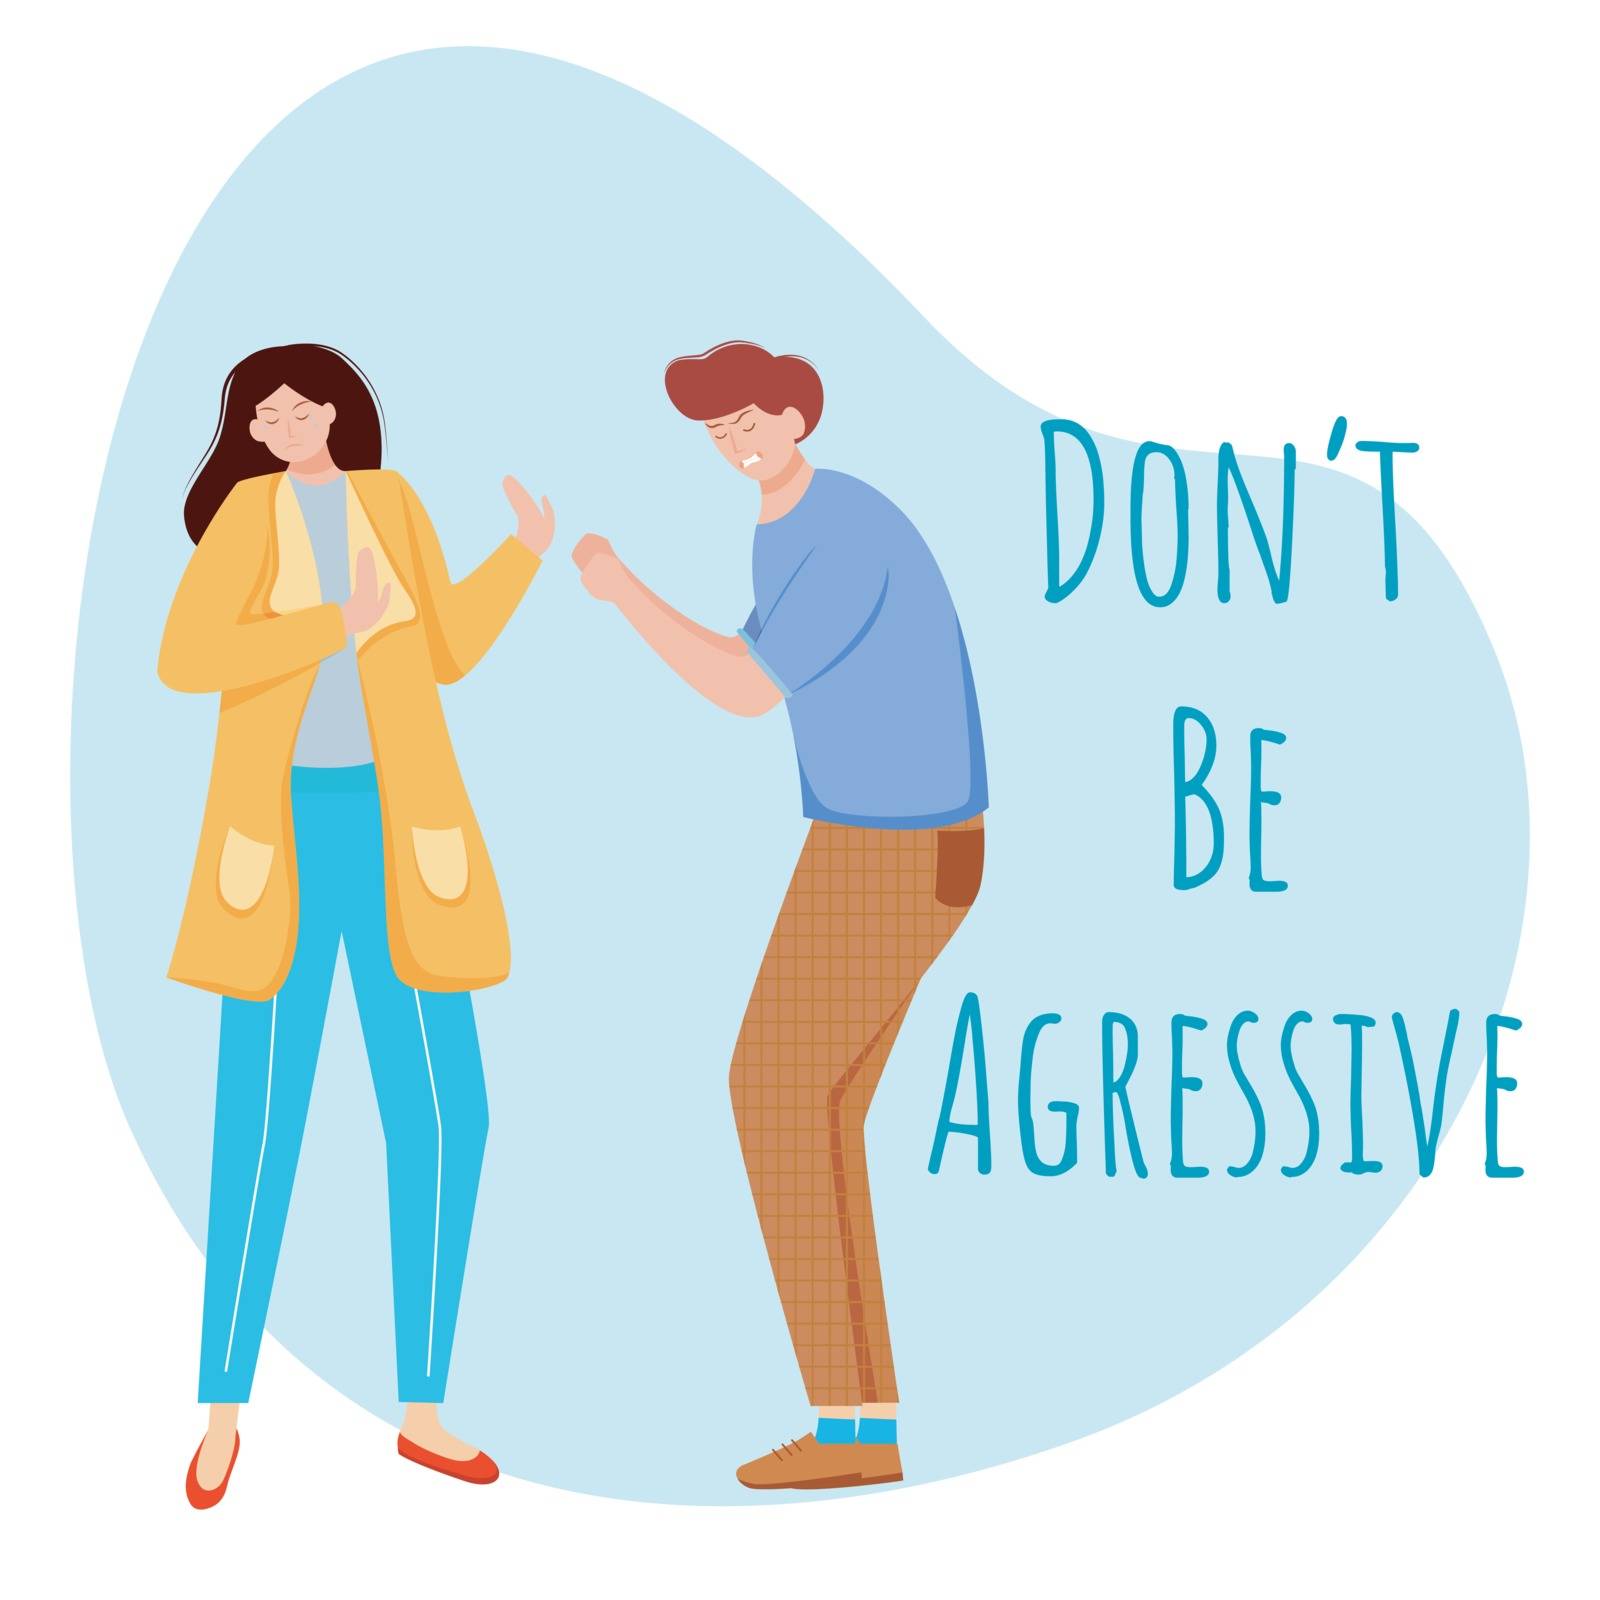 Dont be aggressive flat poster vector template. Misunderstandment in relationship isolated cartoon characters on blue. Family conflicts, quarrels. Couple arguing. Banner design layout with text